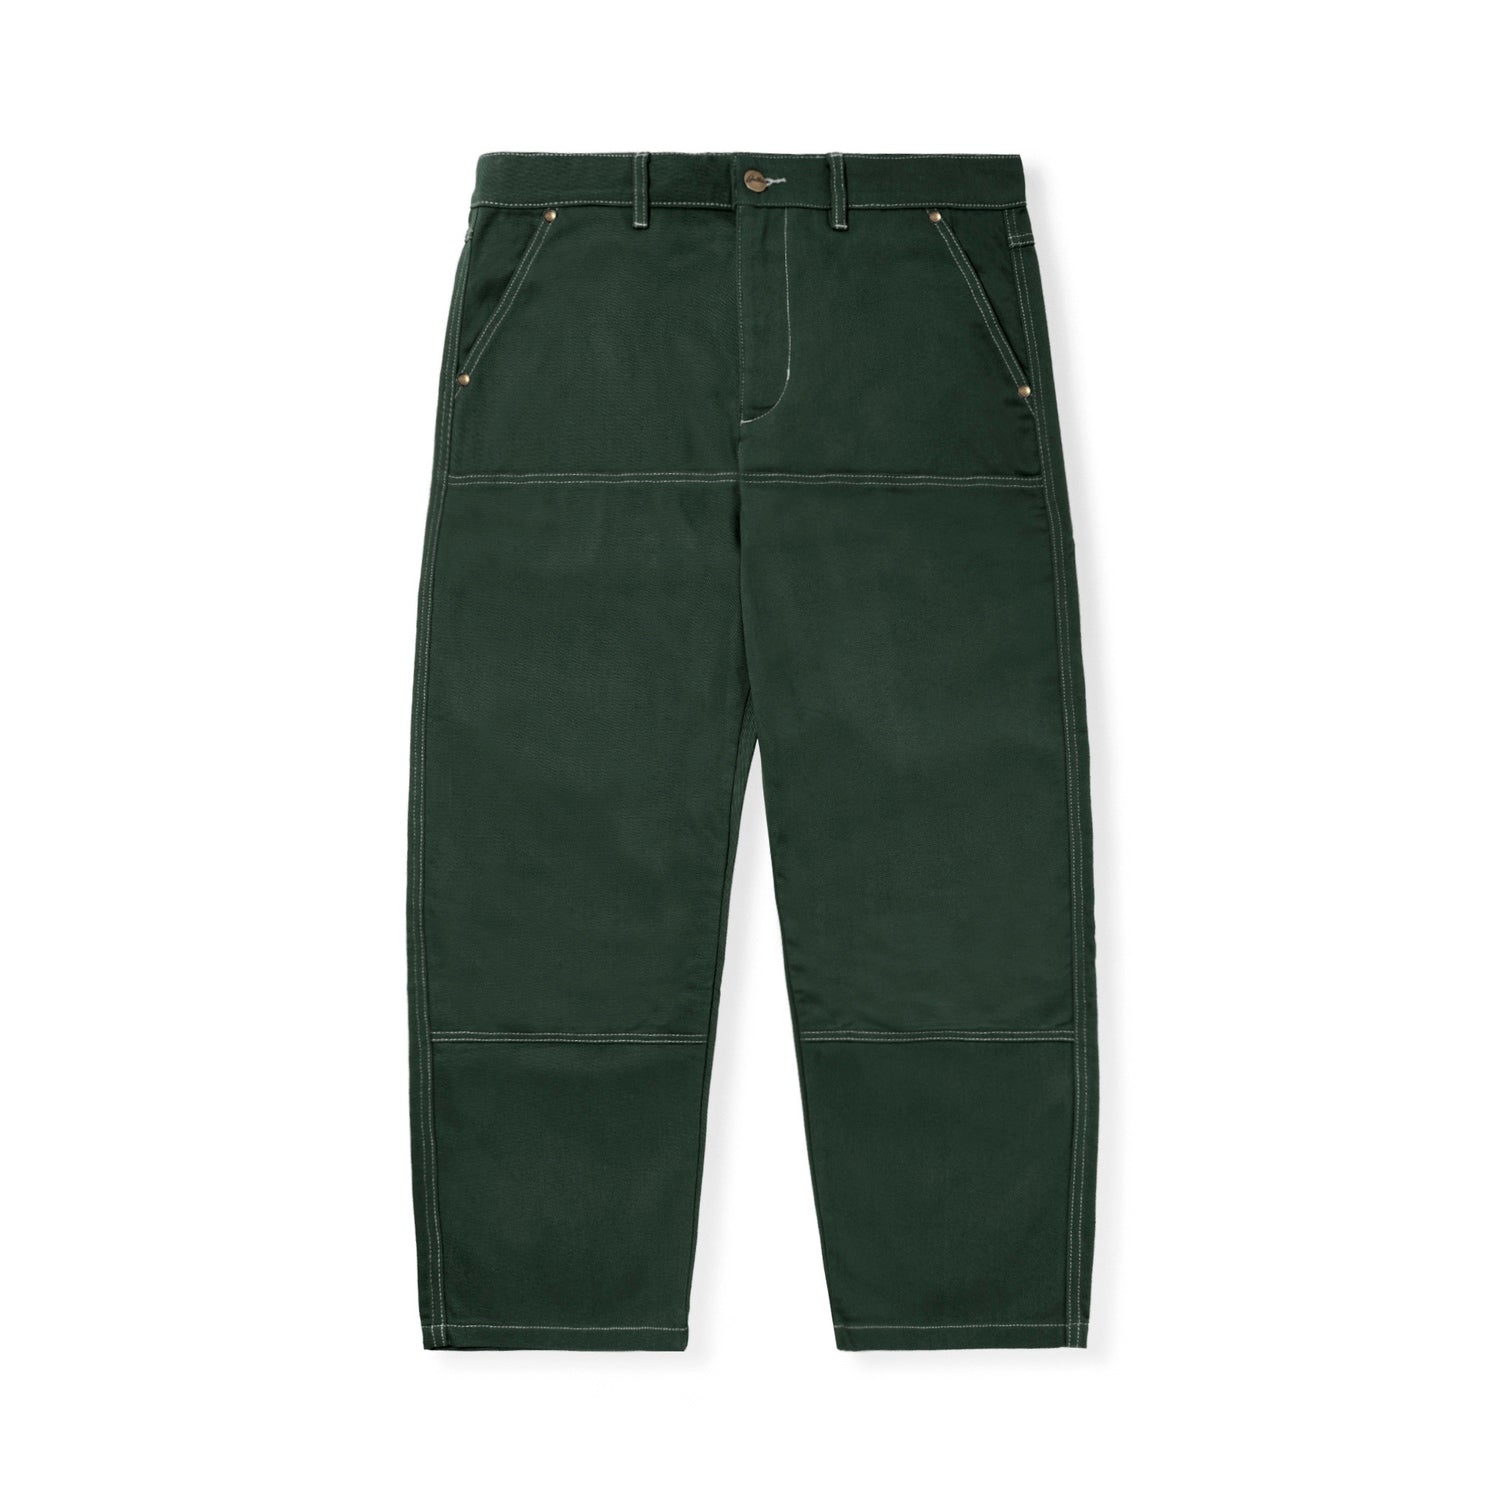 Washed Canvas Double Knee Pants, Brick – Butter Goods USA